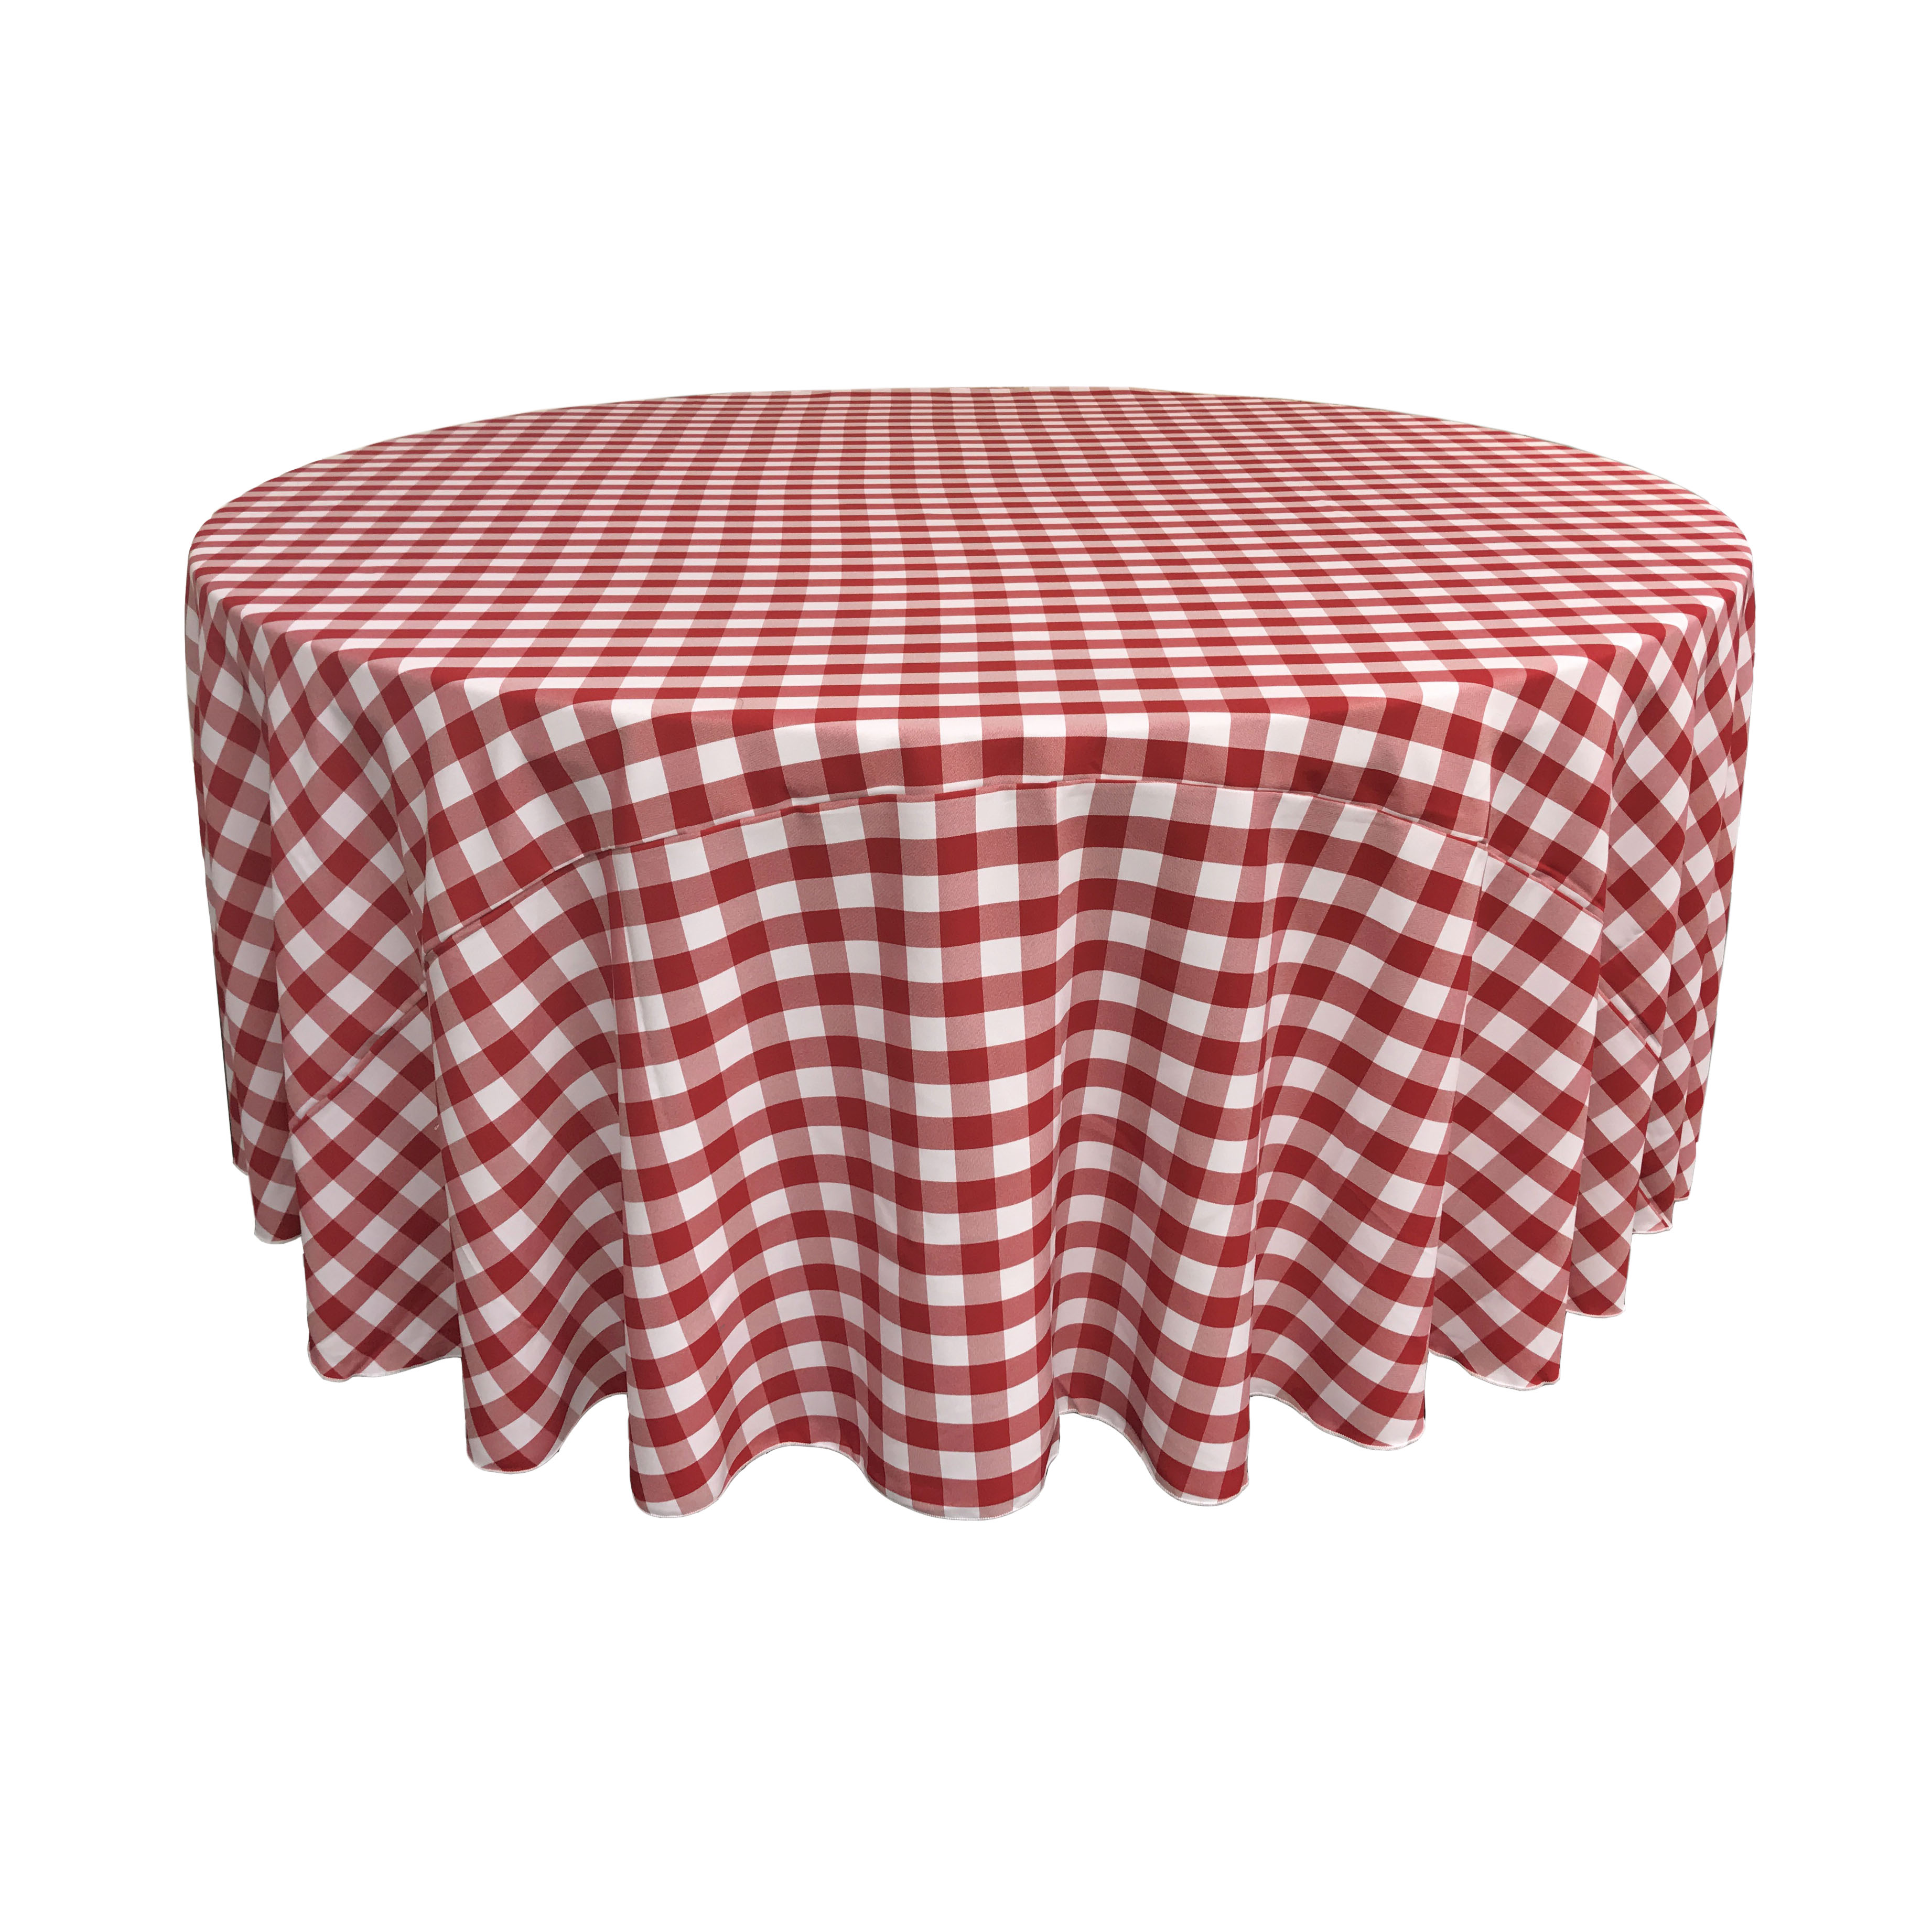 LA Linen Polyester Gingham Checkered 108" Round Tablecloth, White and Red